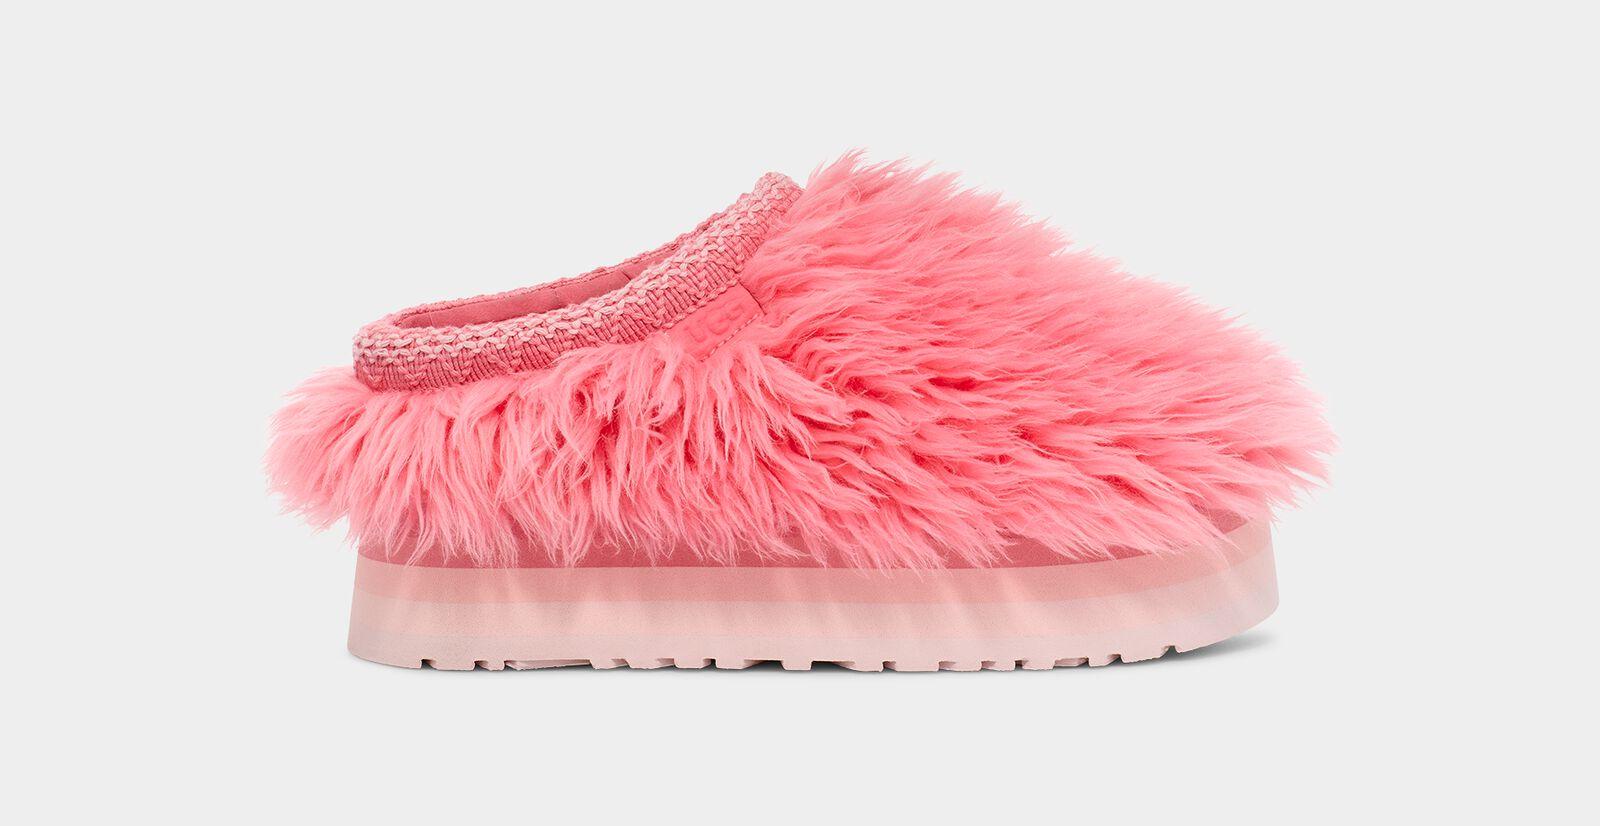 UGG FLUFF MOMMA PINK SLIPPERS - 7 – UpScaleIT